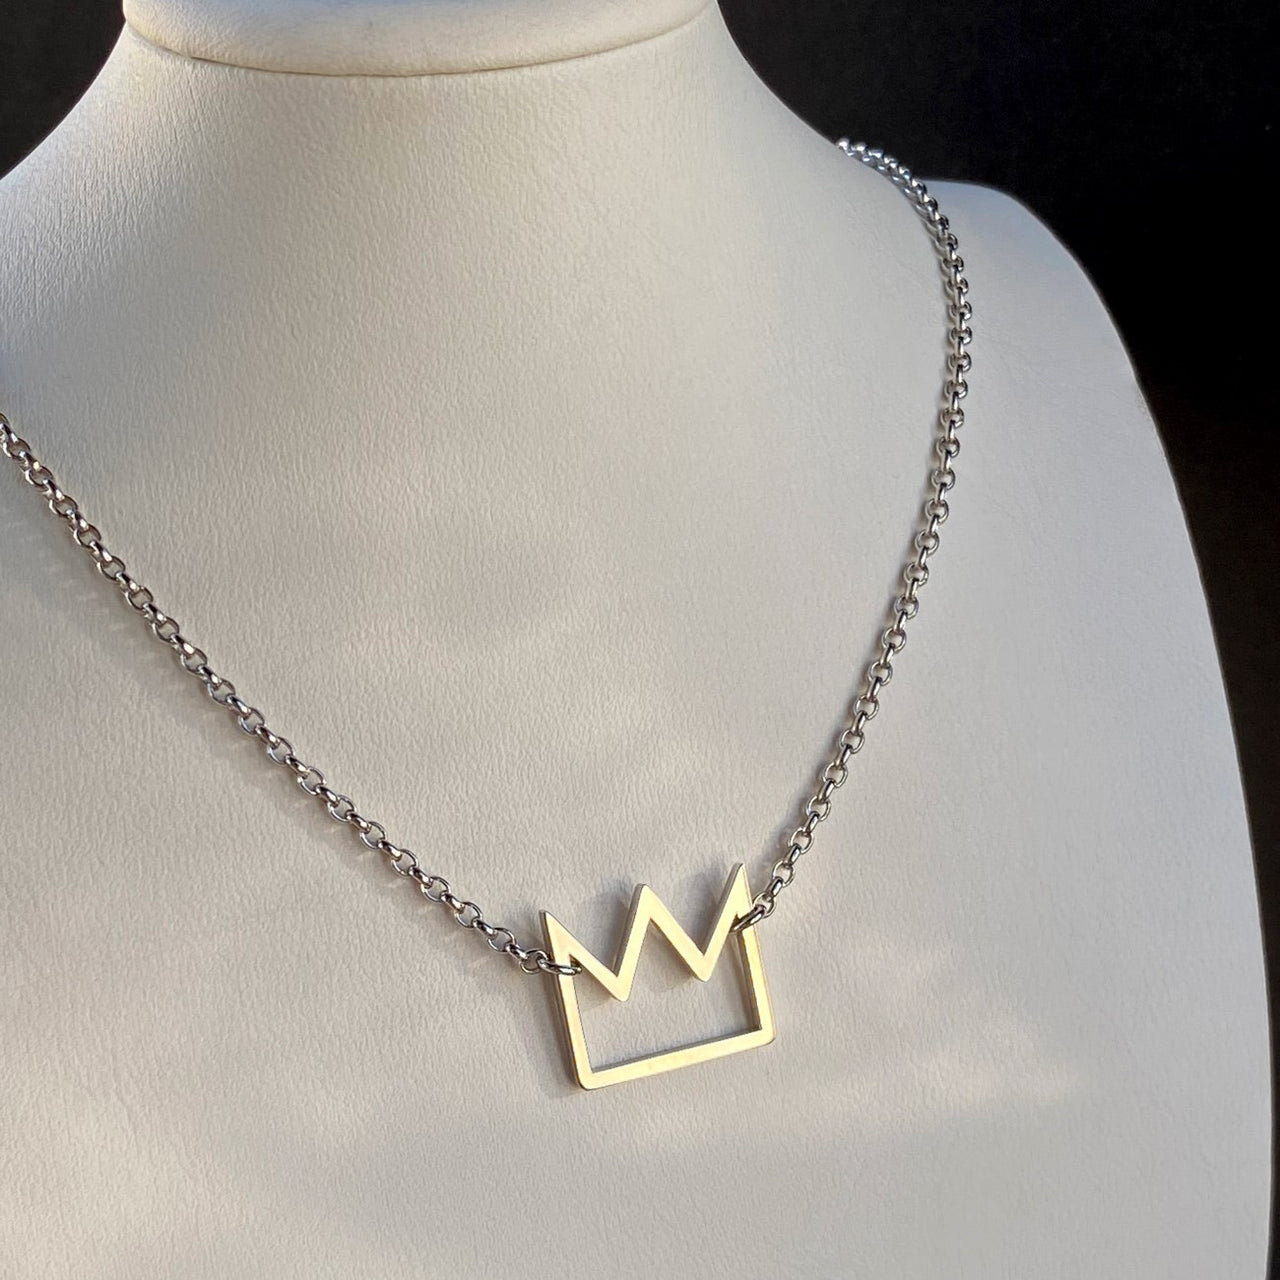 CHAIN WITH PENDANT "CROWN" / SILVER